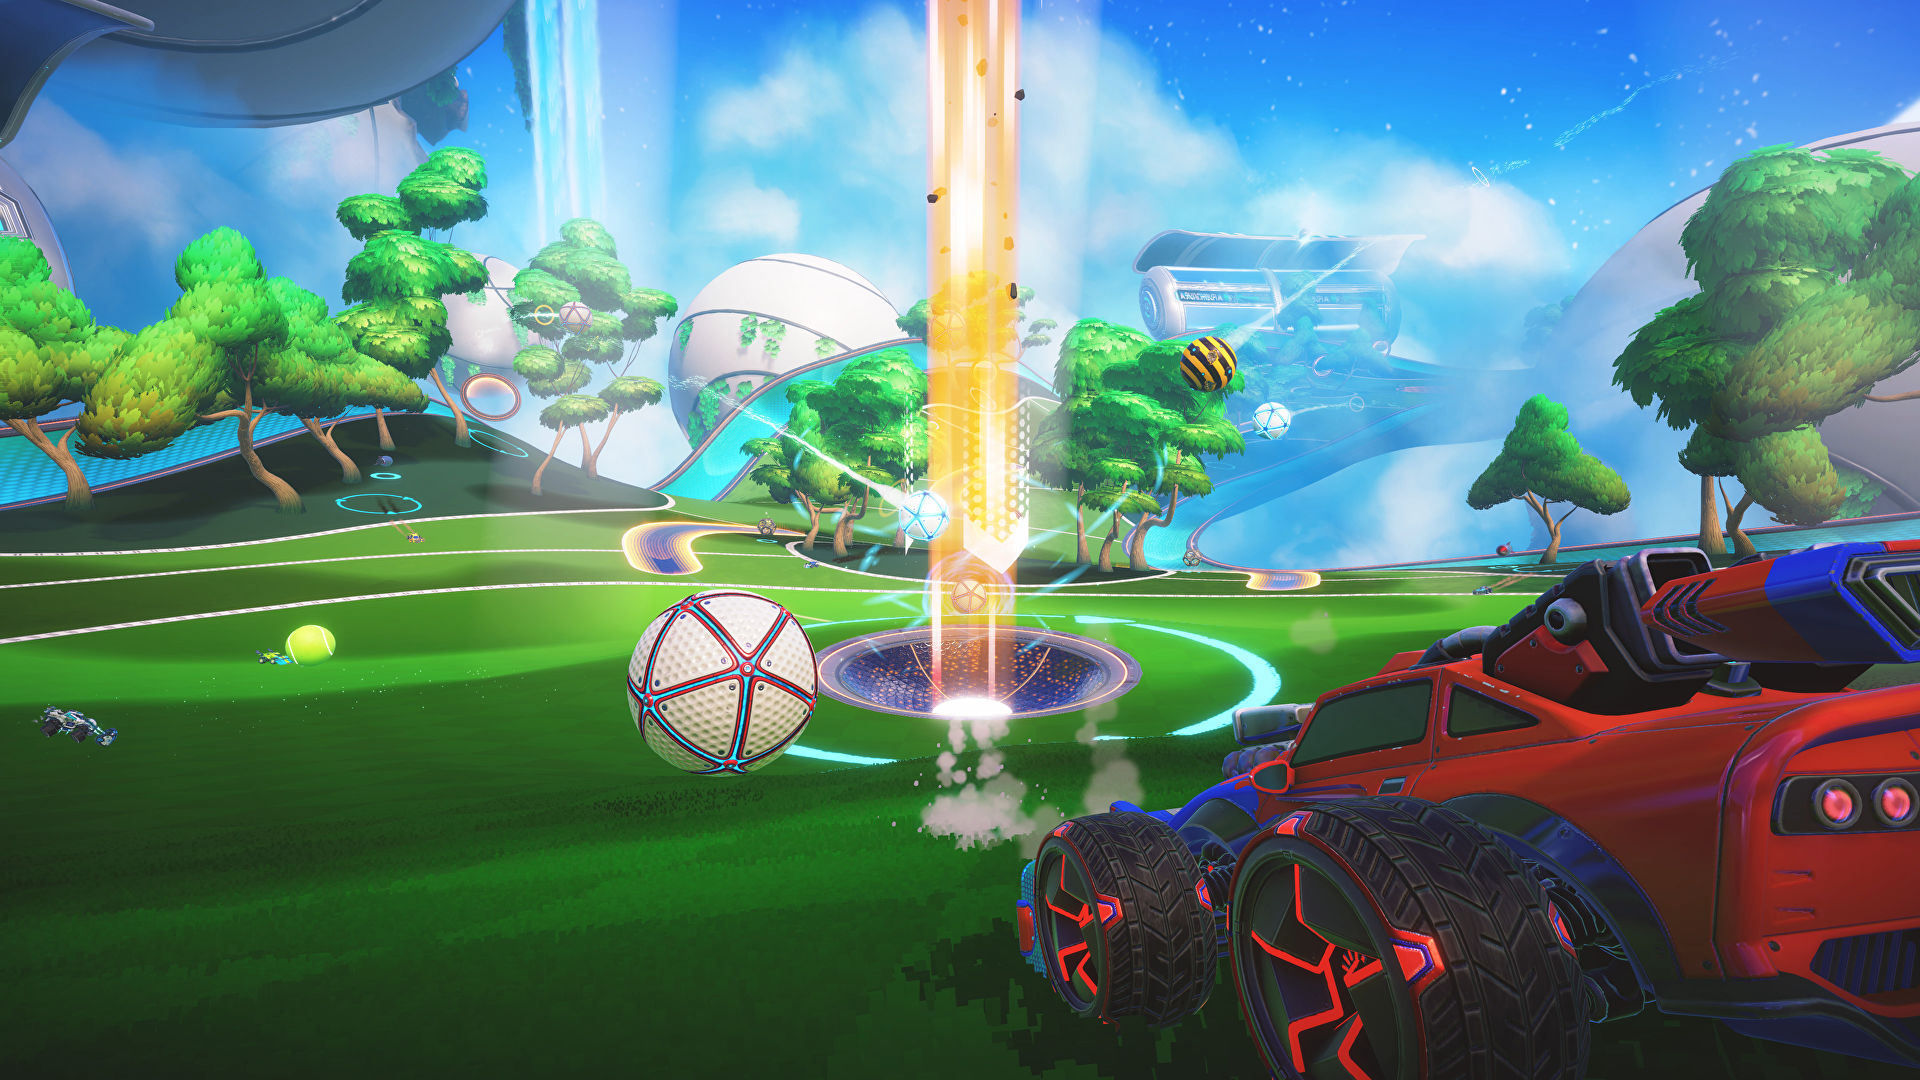 turbo-golf-racing-is-just-rocket-league-with-golf,-but-that's-ok